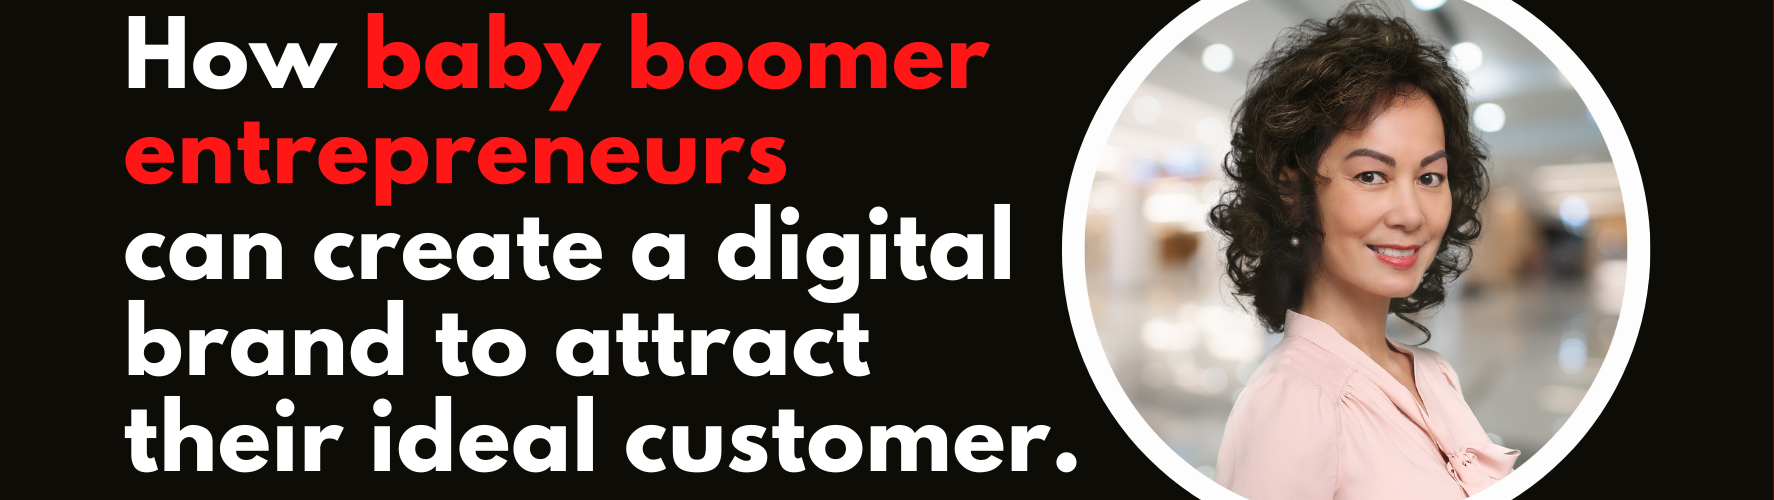 How Baby Boomer Entrepreneurs Can Create a Digital Brand to Attract Their Ideal Customer